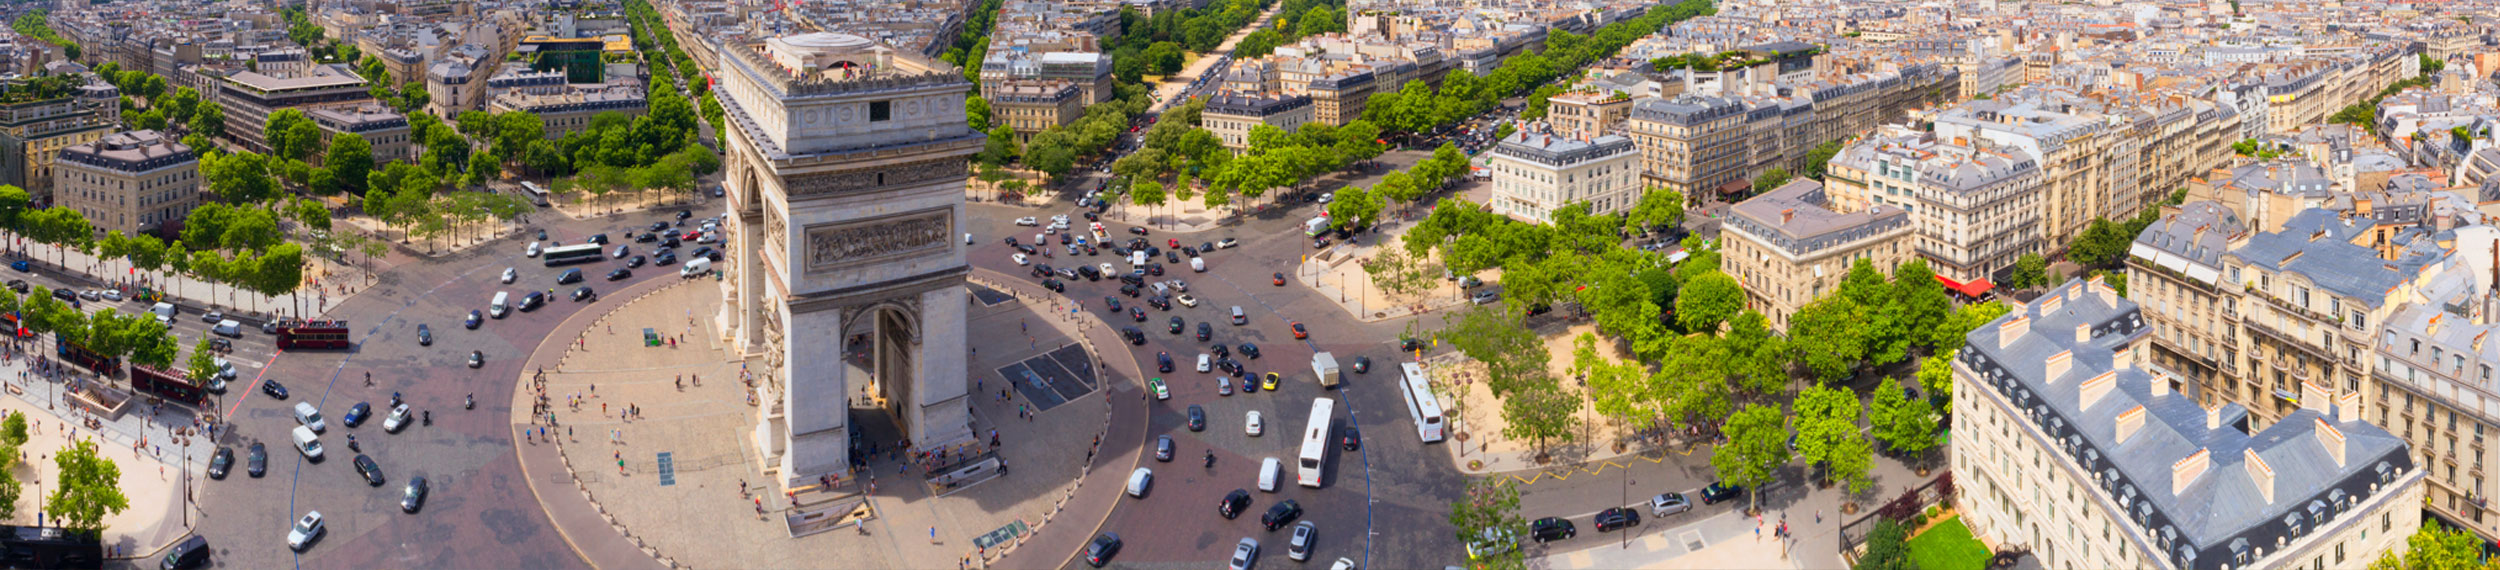 An aerial view of the Arch de Triomphe in Paris, France.